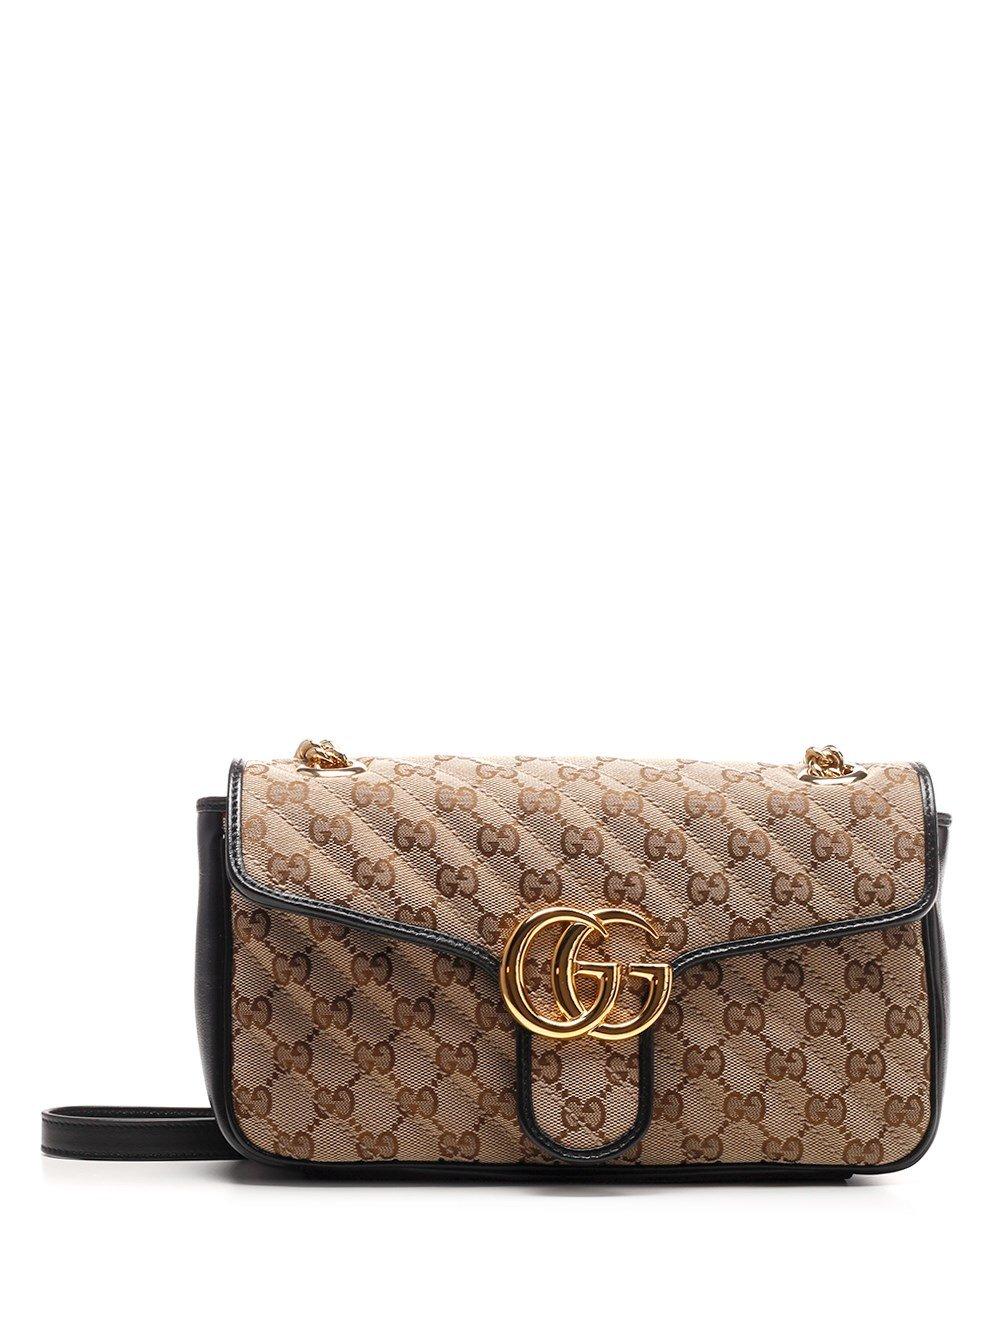 Gucci GG Marmont Small Shoulder Bag in Natural | Lyst